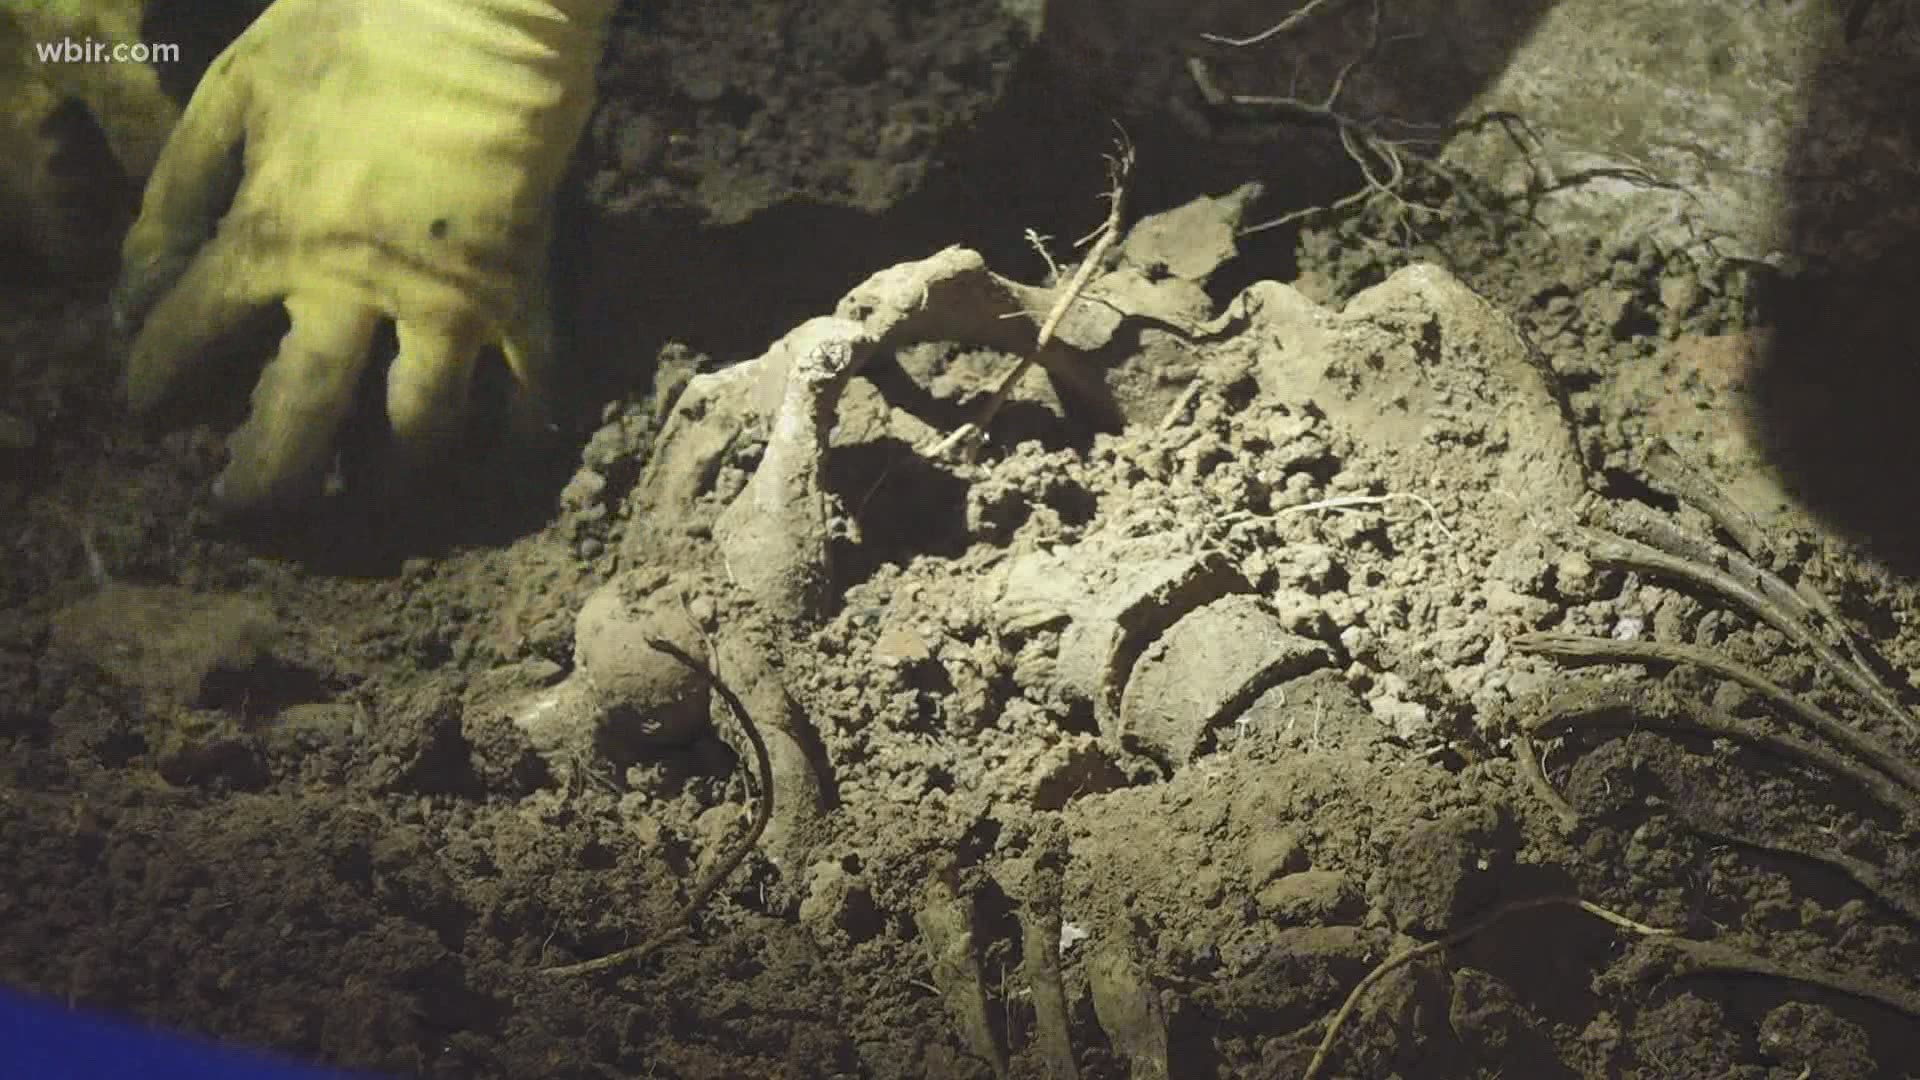 The site is the Forensic Anthropology Center, better known as "The Body Farm."